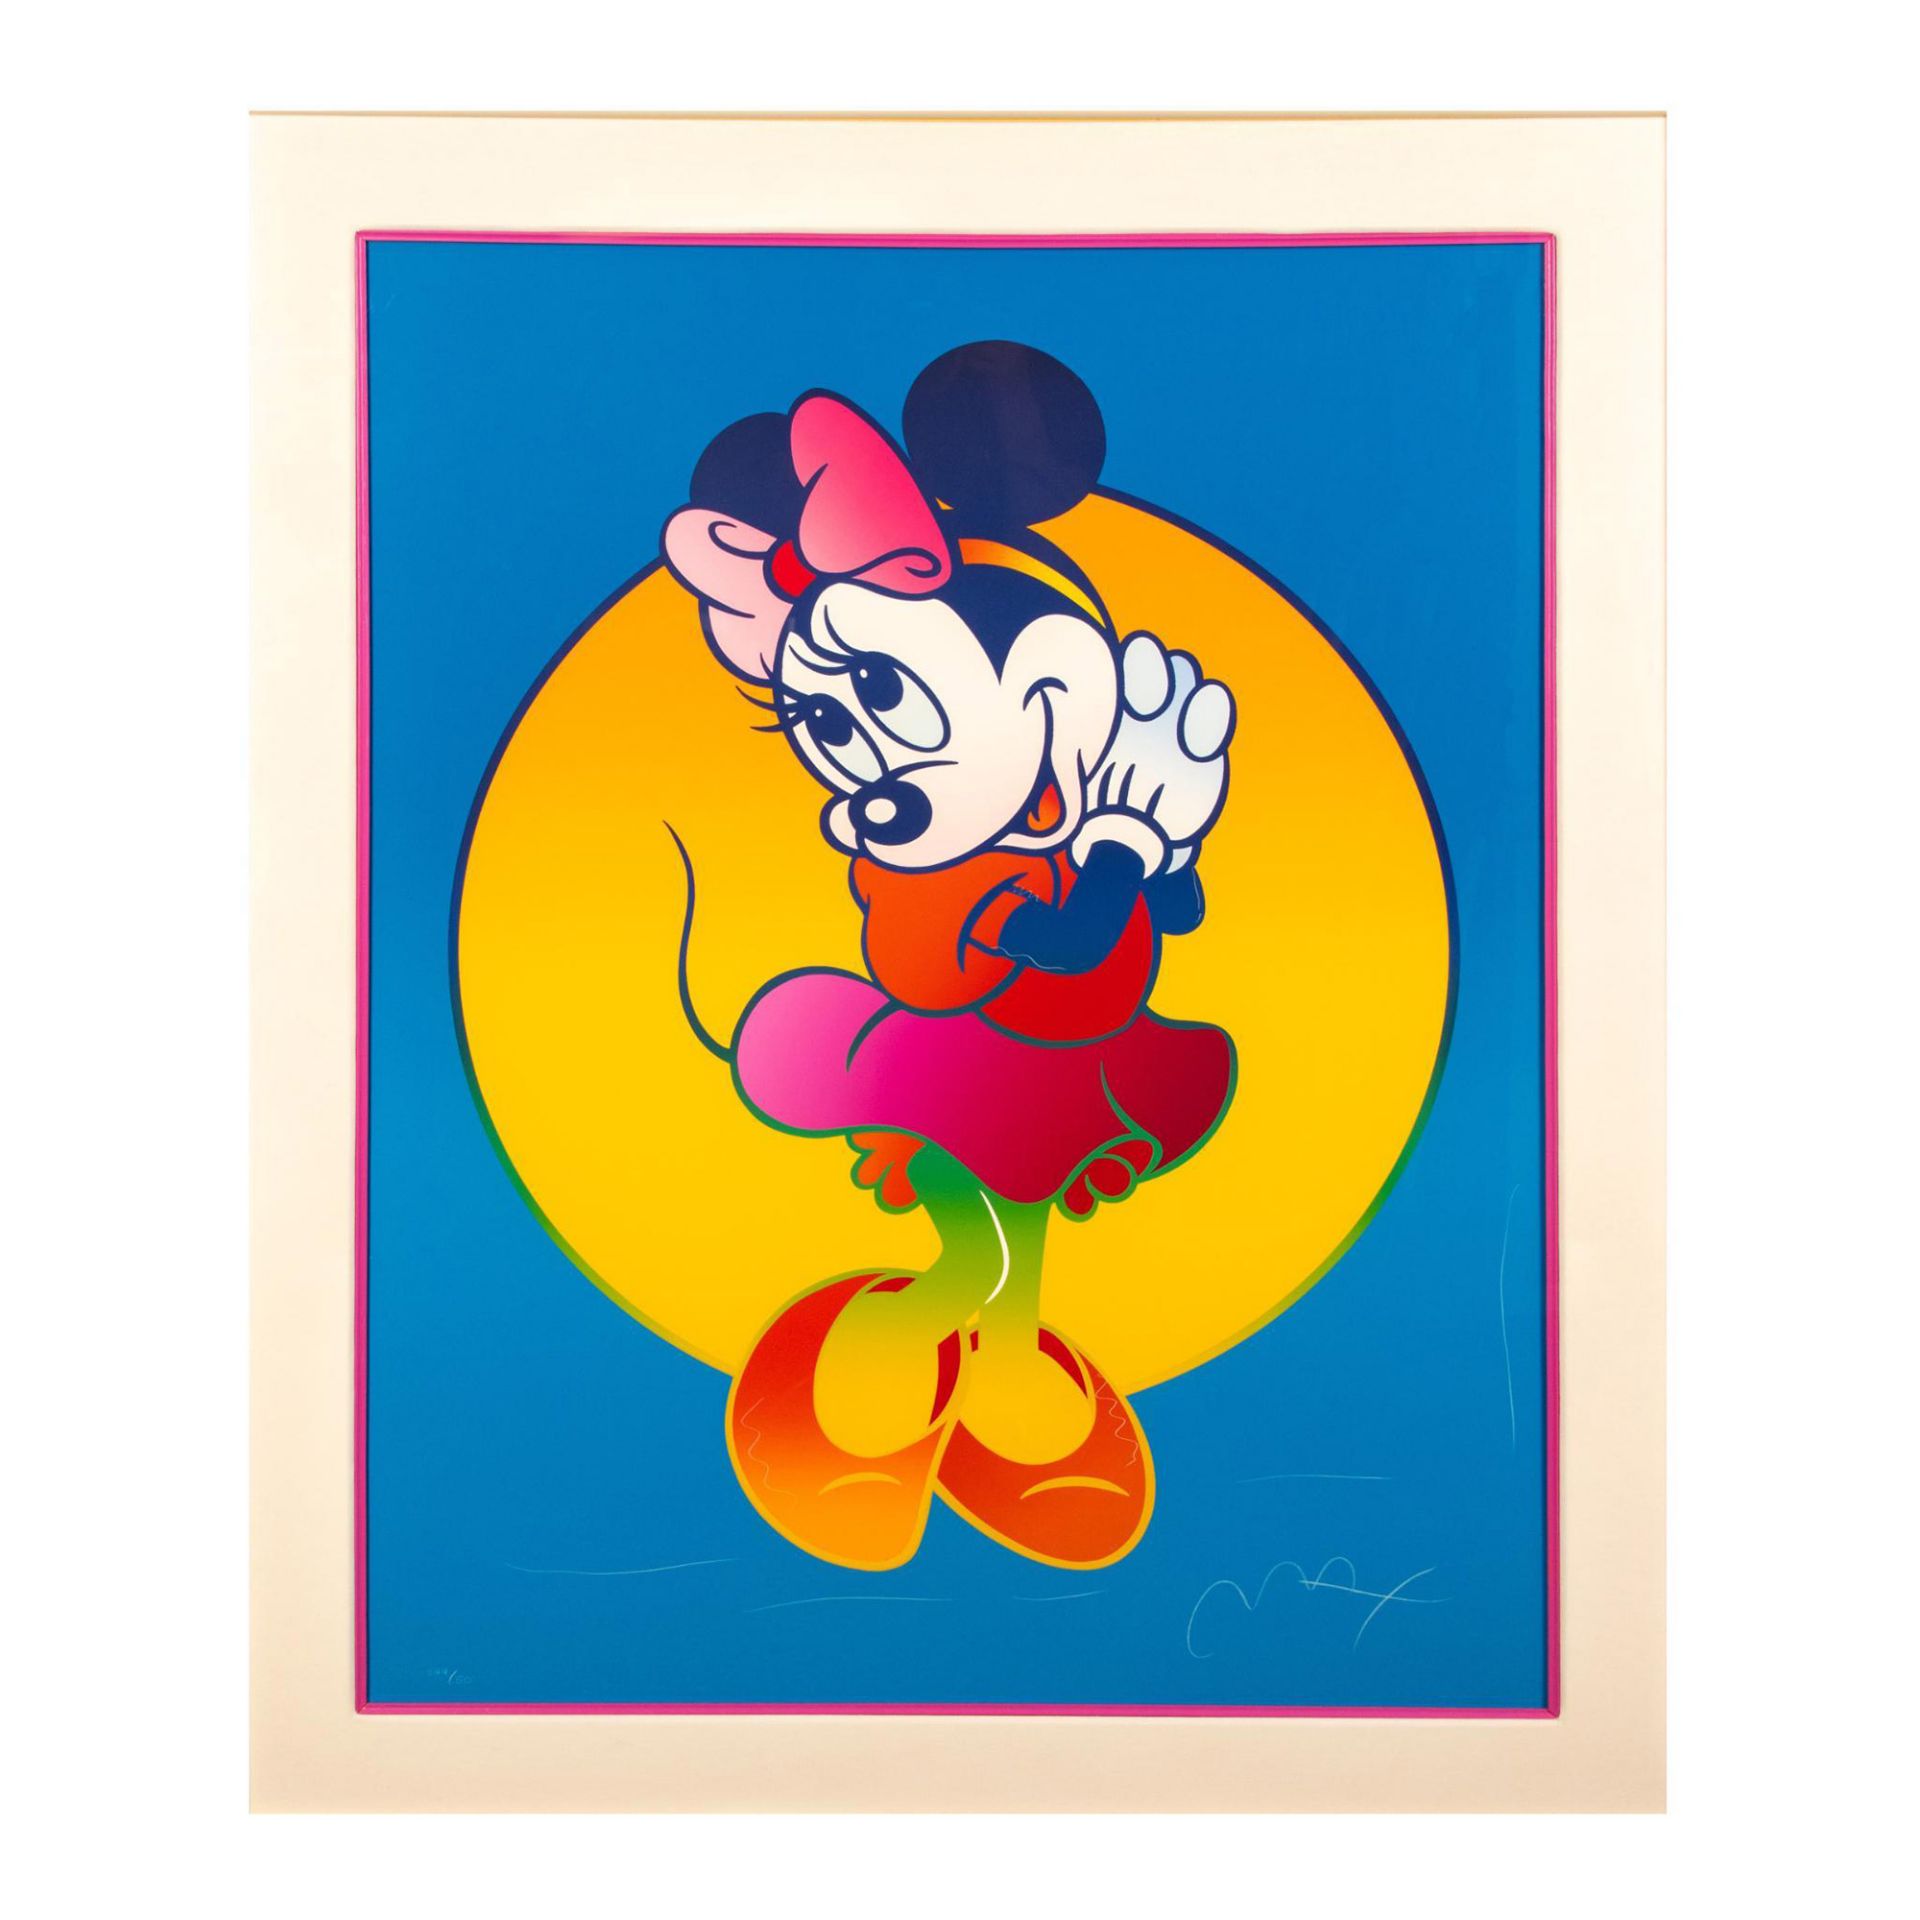 Peter Max (American, b. 1937) Color Serigraph on Paper, Minnie Mouse, Signed - Image 2 of 5